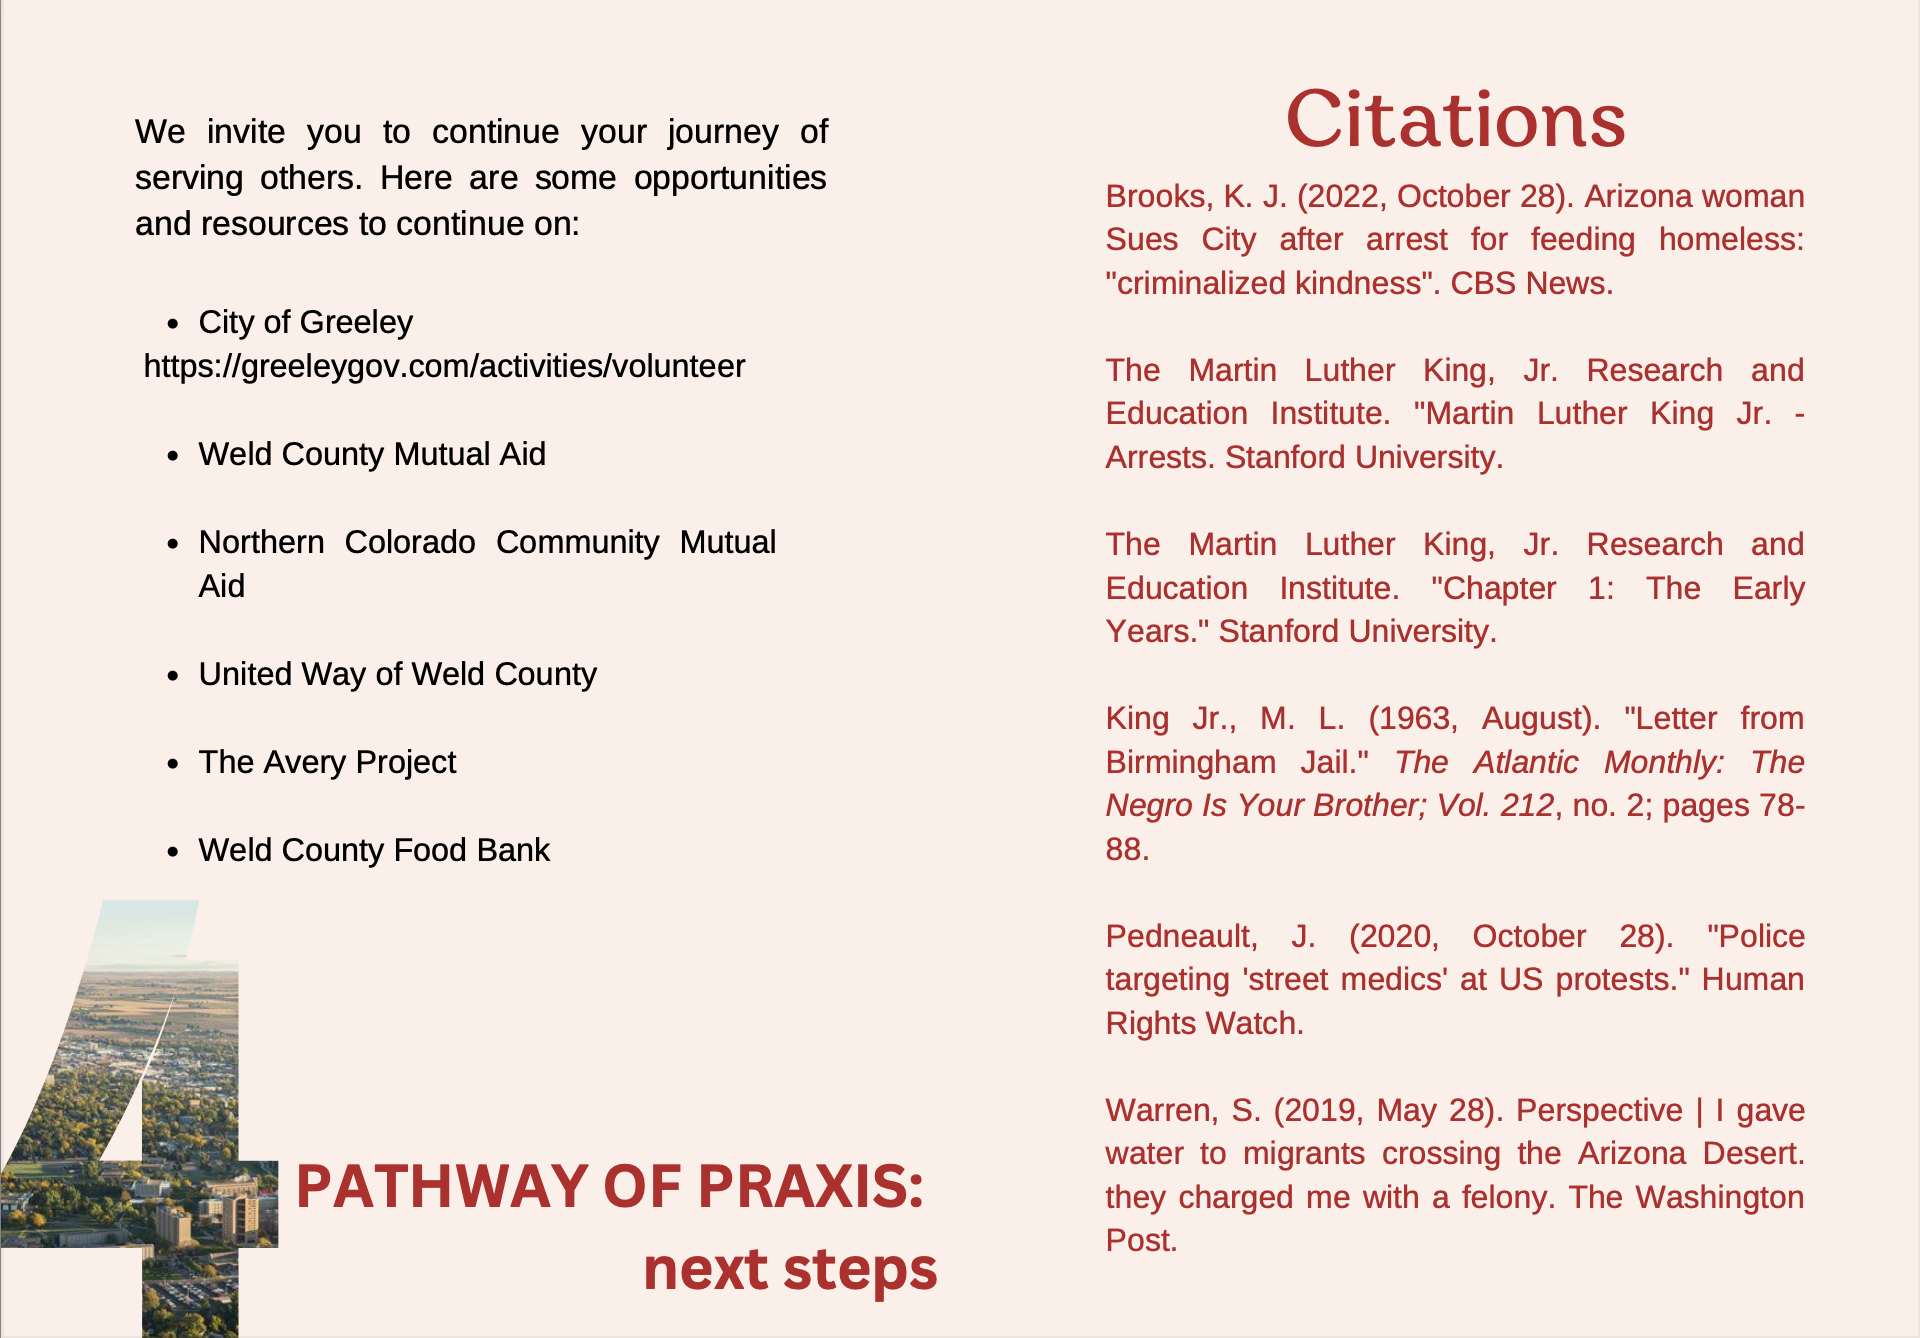 MGCC_Pathway_of_Praxis